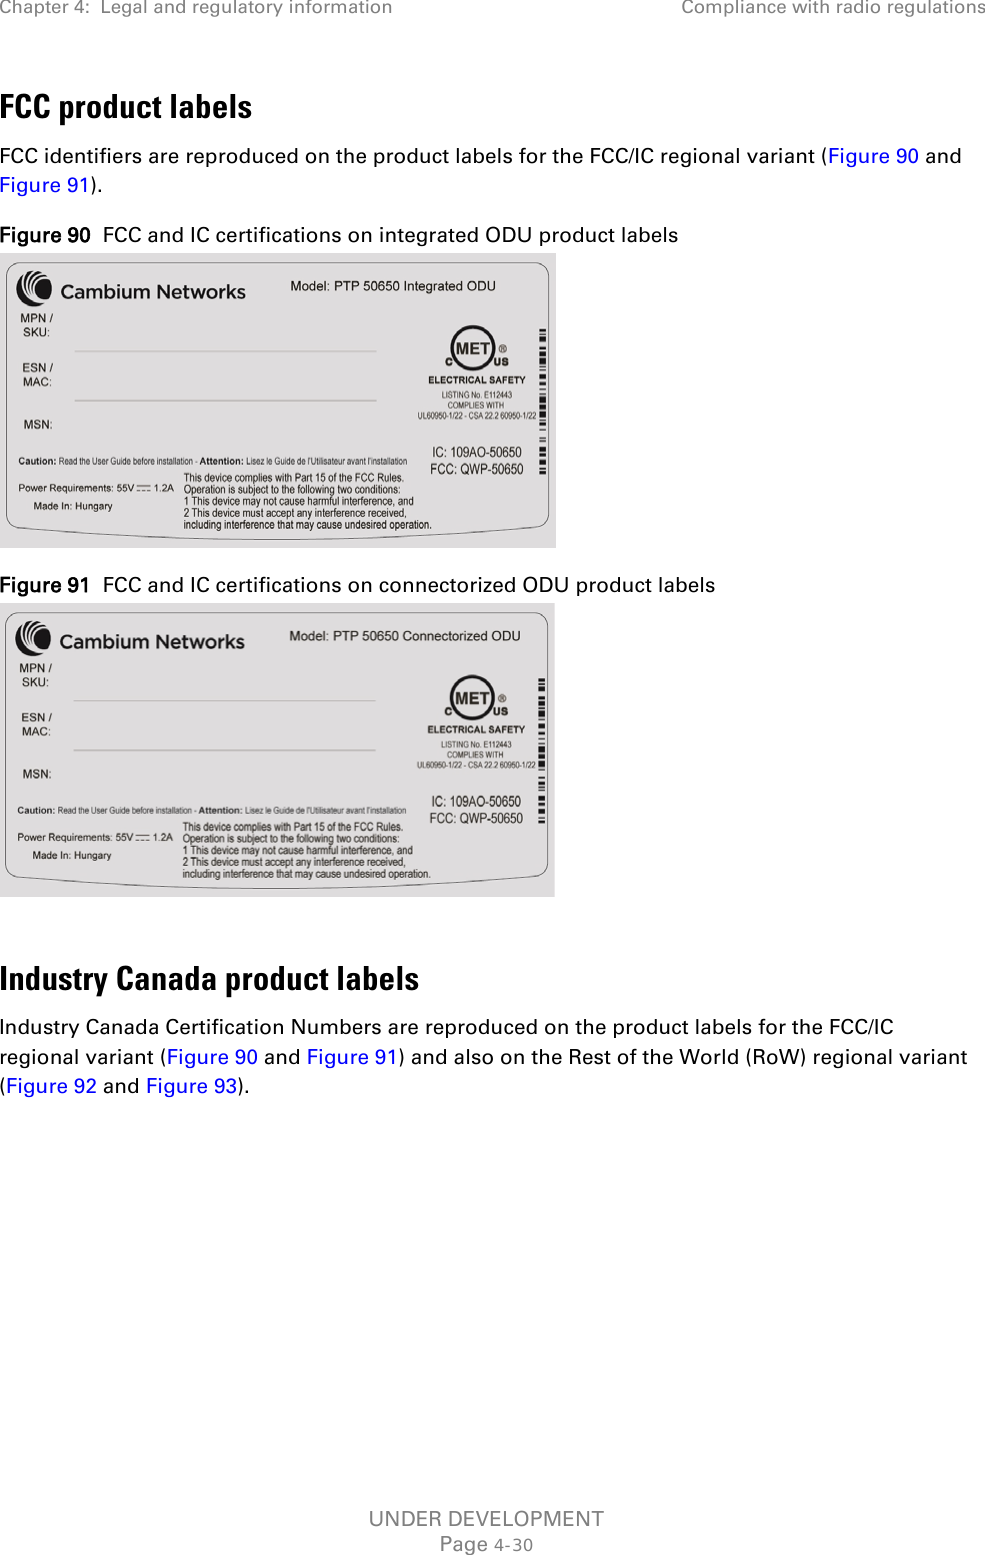 Chapter 4:  Legal and regulatory information Compliance with radio regulations  FCC product labels FCC identifiers are reproduced on the product labels for the FCC/IC regional variant (Figure 90 and Figure 91). Figure 90  FCC and IC certifications on integrated ODU product labels  Figure 91  FCC and IC certifications on connectorized ODU product labels   Industry Canada product labels Industry Canada Certification Numbers are reproduced on the product labels for the FCC/IC regional variant (Figure 90 and Figure 91) and also on the Rest of the World (RoW) regional variant (Figure 92 and Figure 93). UNDER DEVELOPMENT Page 4-30 